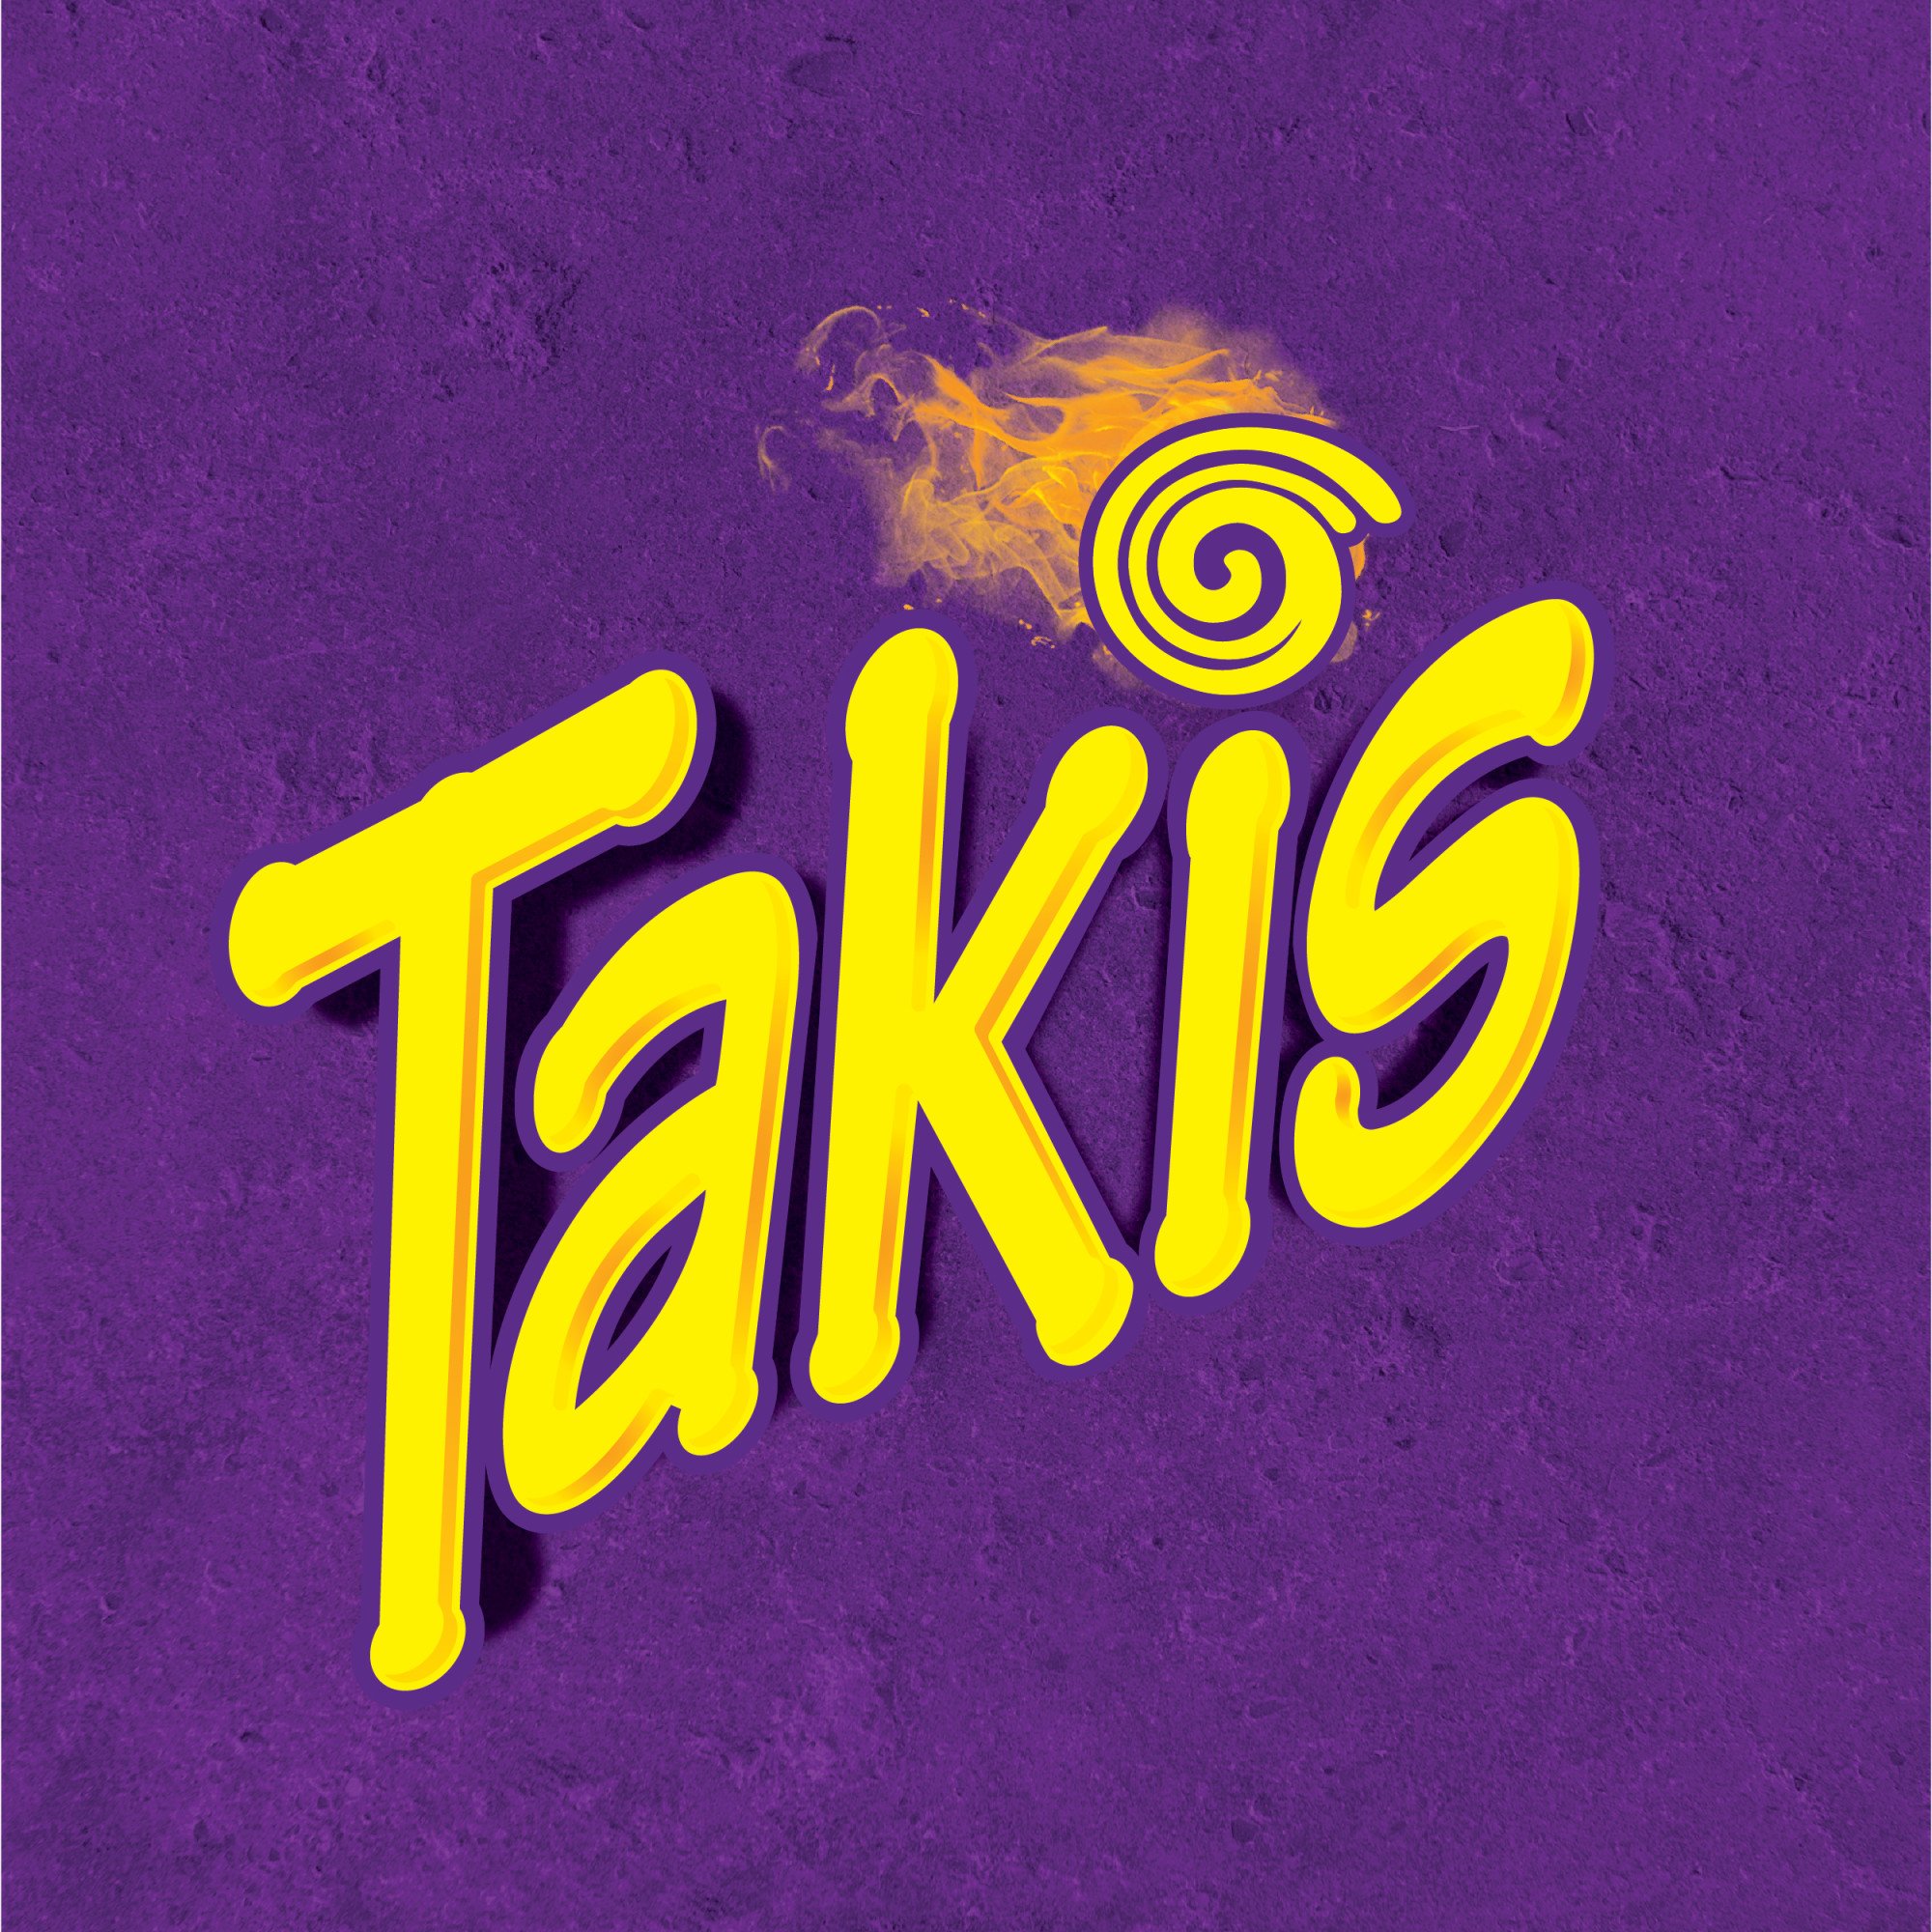 who invented takis chips